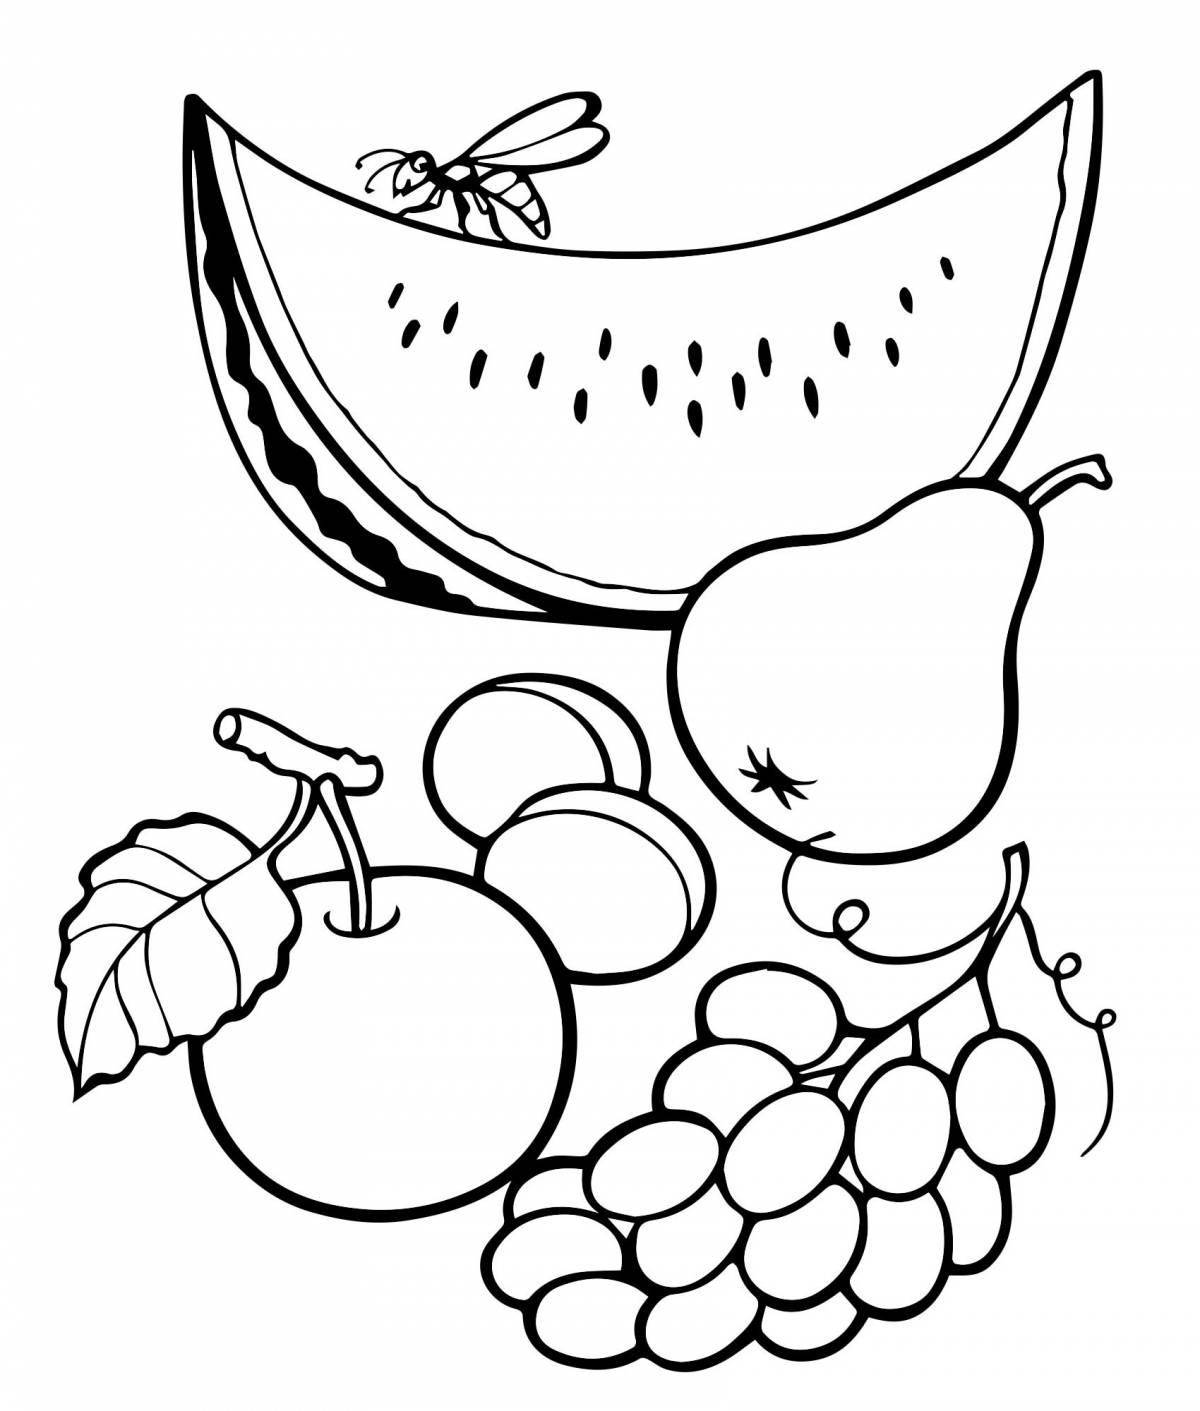 Refreshing berries and fruits coloring book